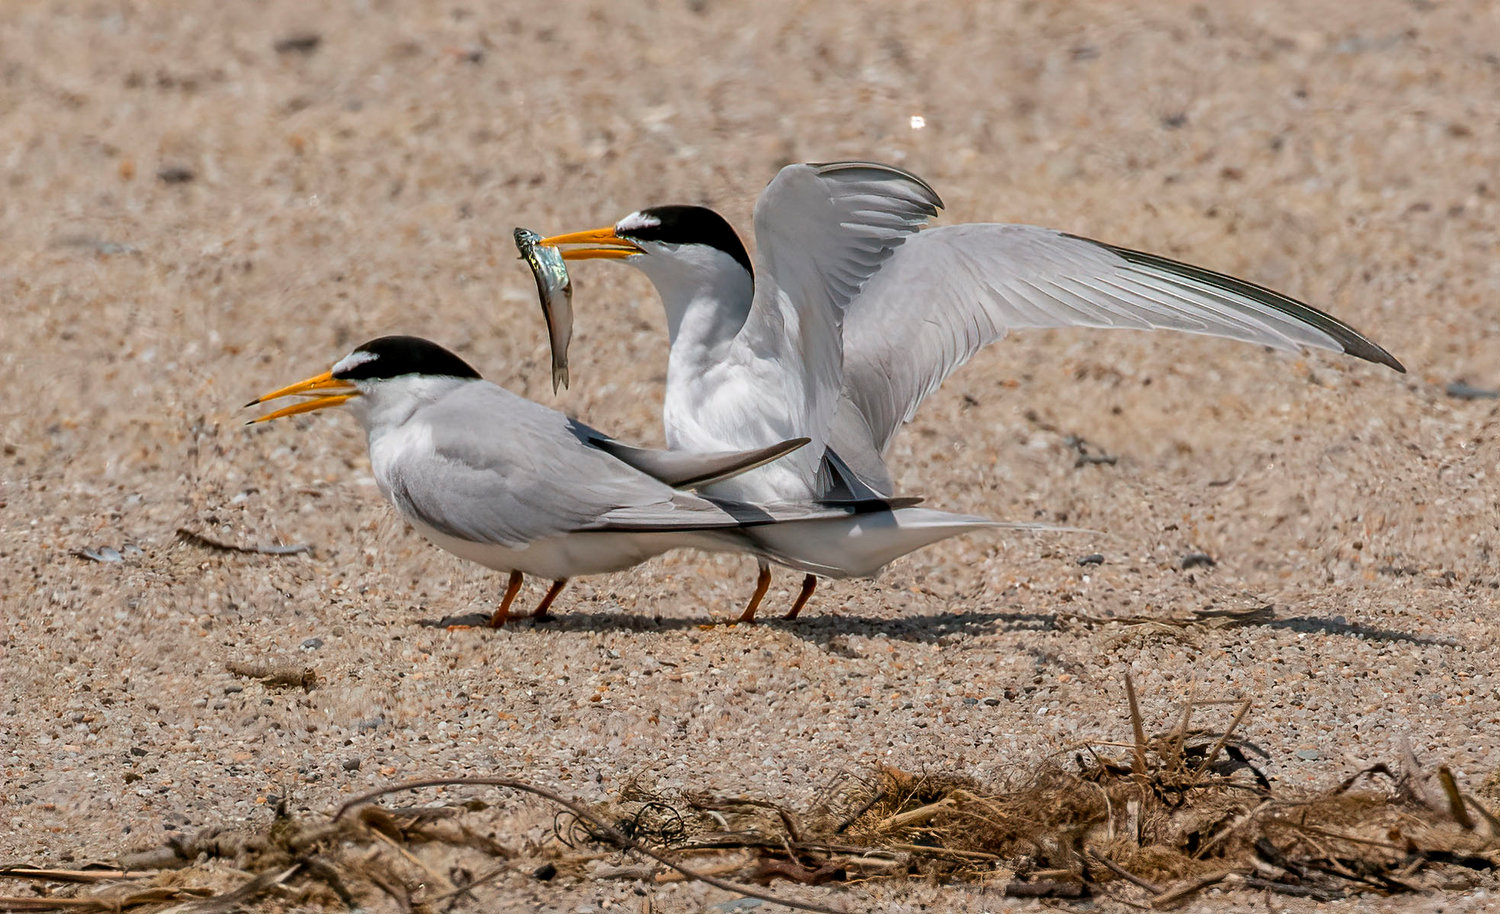 Good provider: a Least Tern arrives with a fish dinner for his mate.